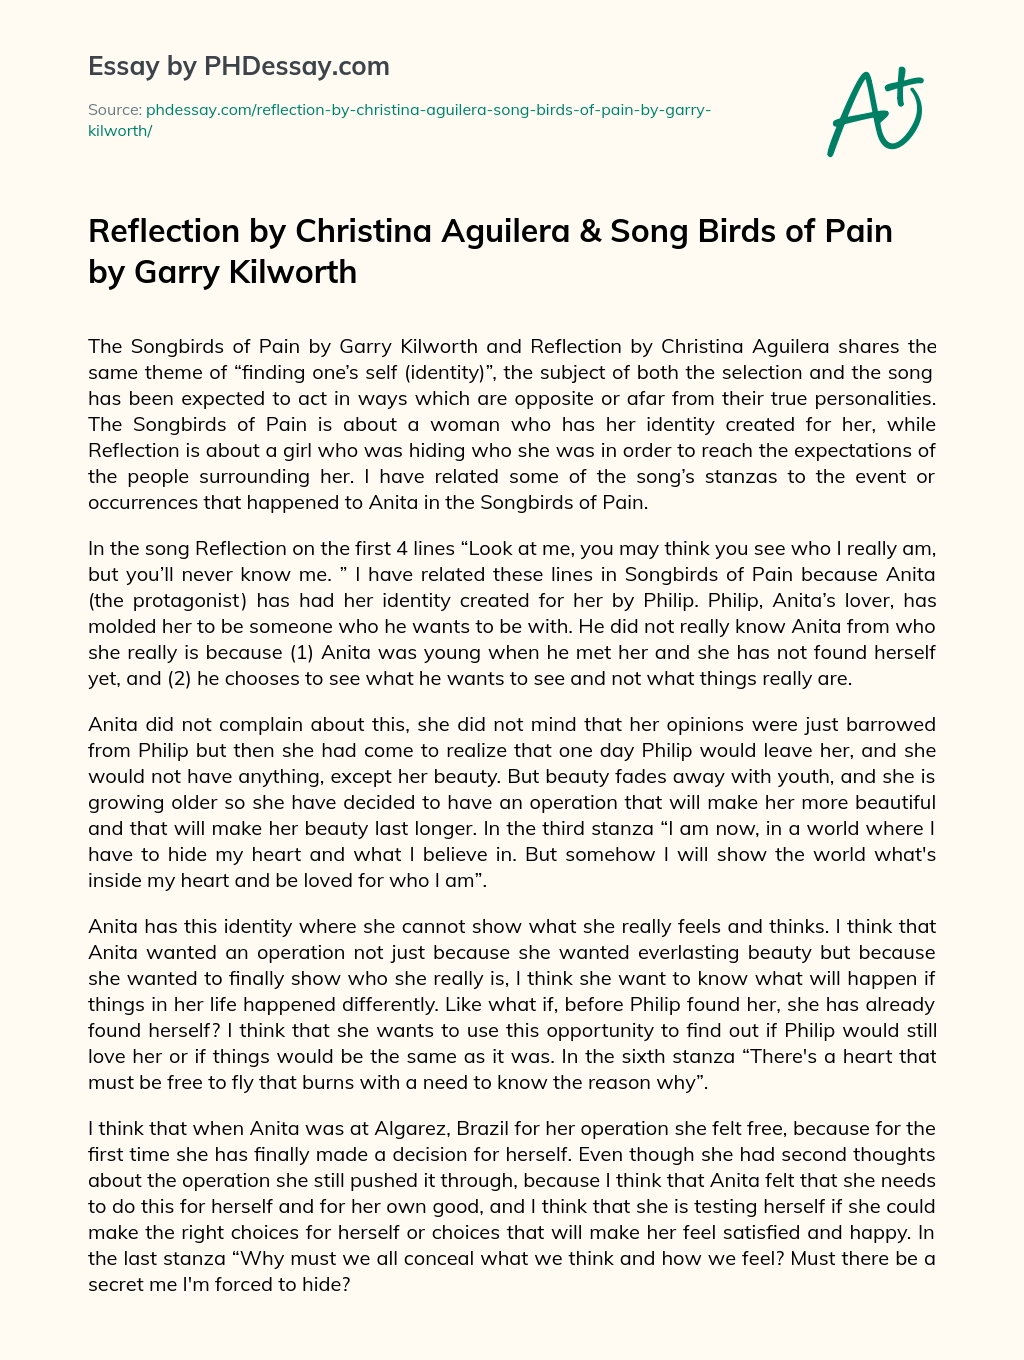 Reflection by Christina Aguilera & Song Birds of Pain by Garry Kilworth essay